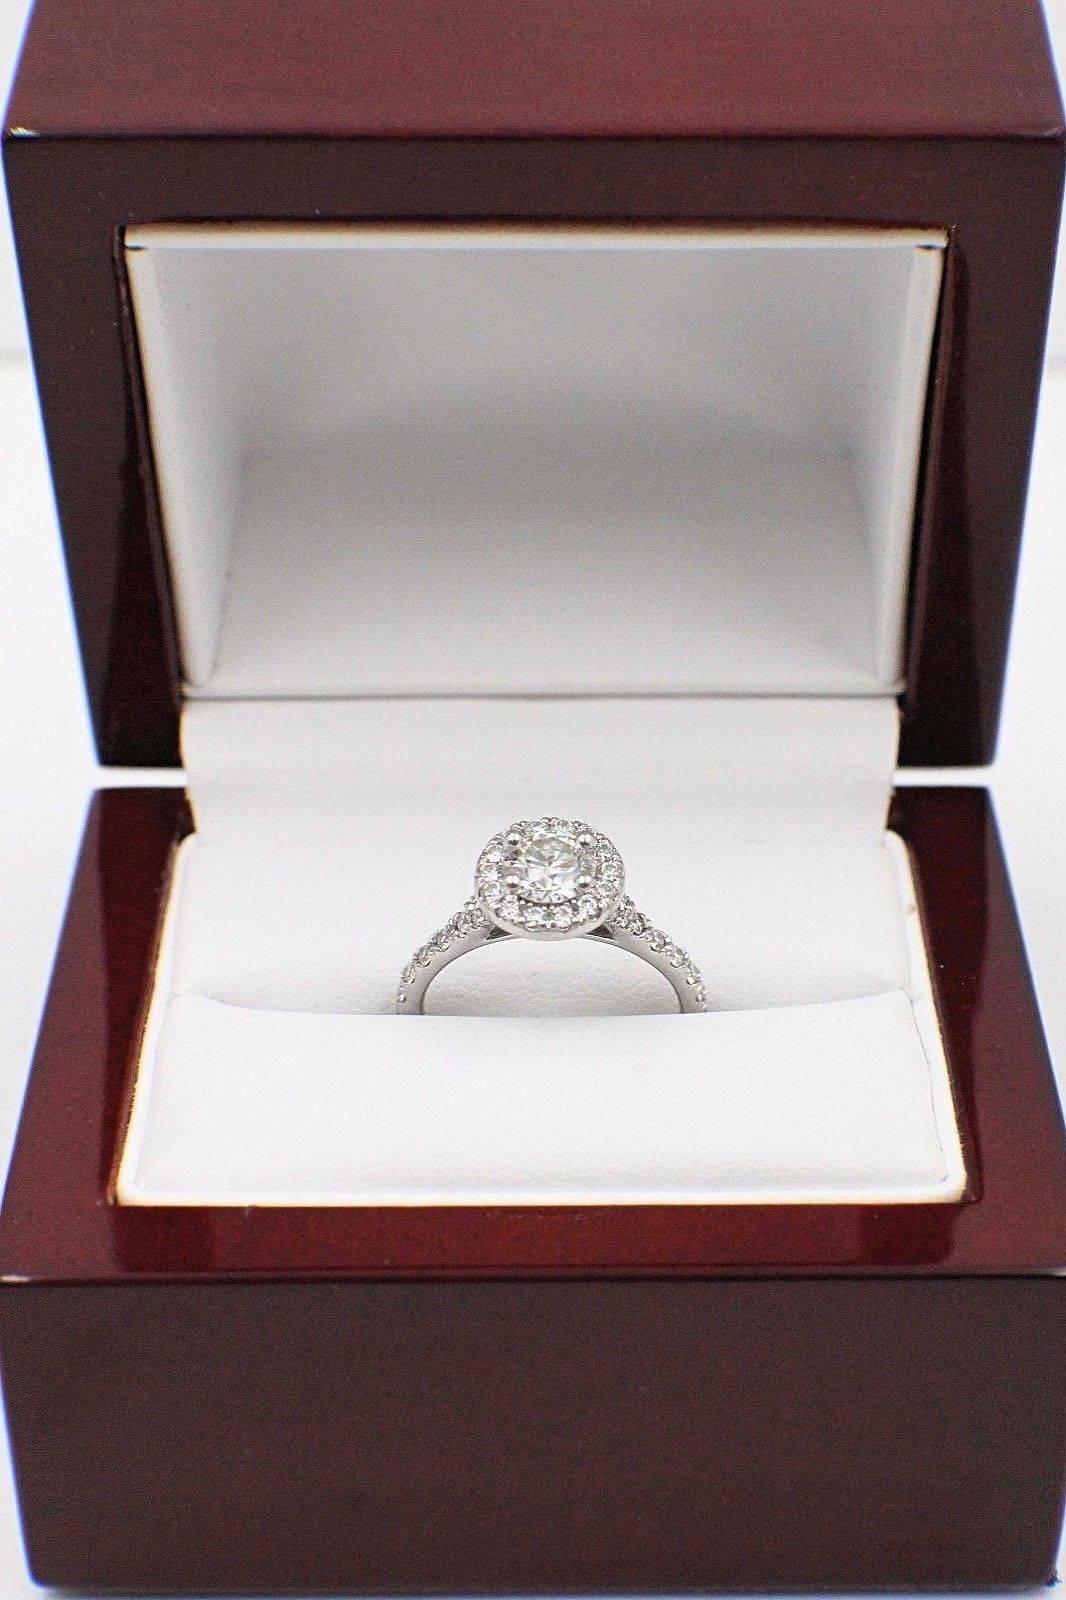 Women's Hearts on Fire Transcend Single Halo Diamond Engagement Ring 1.02TCW in Platinum